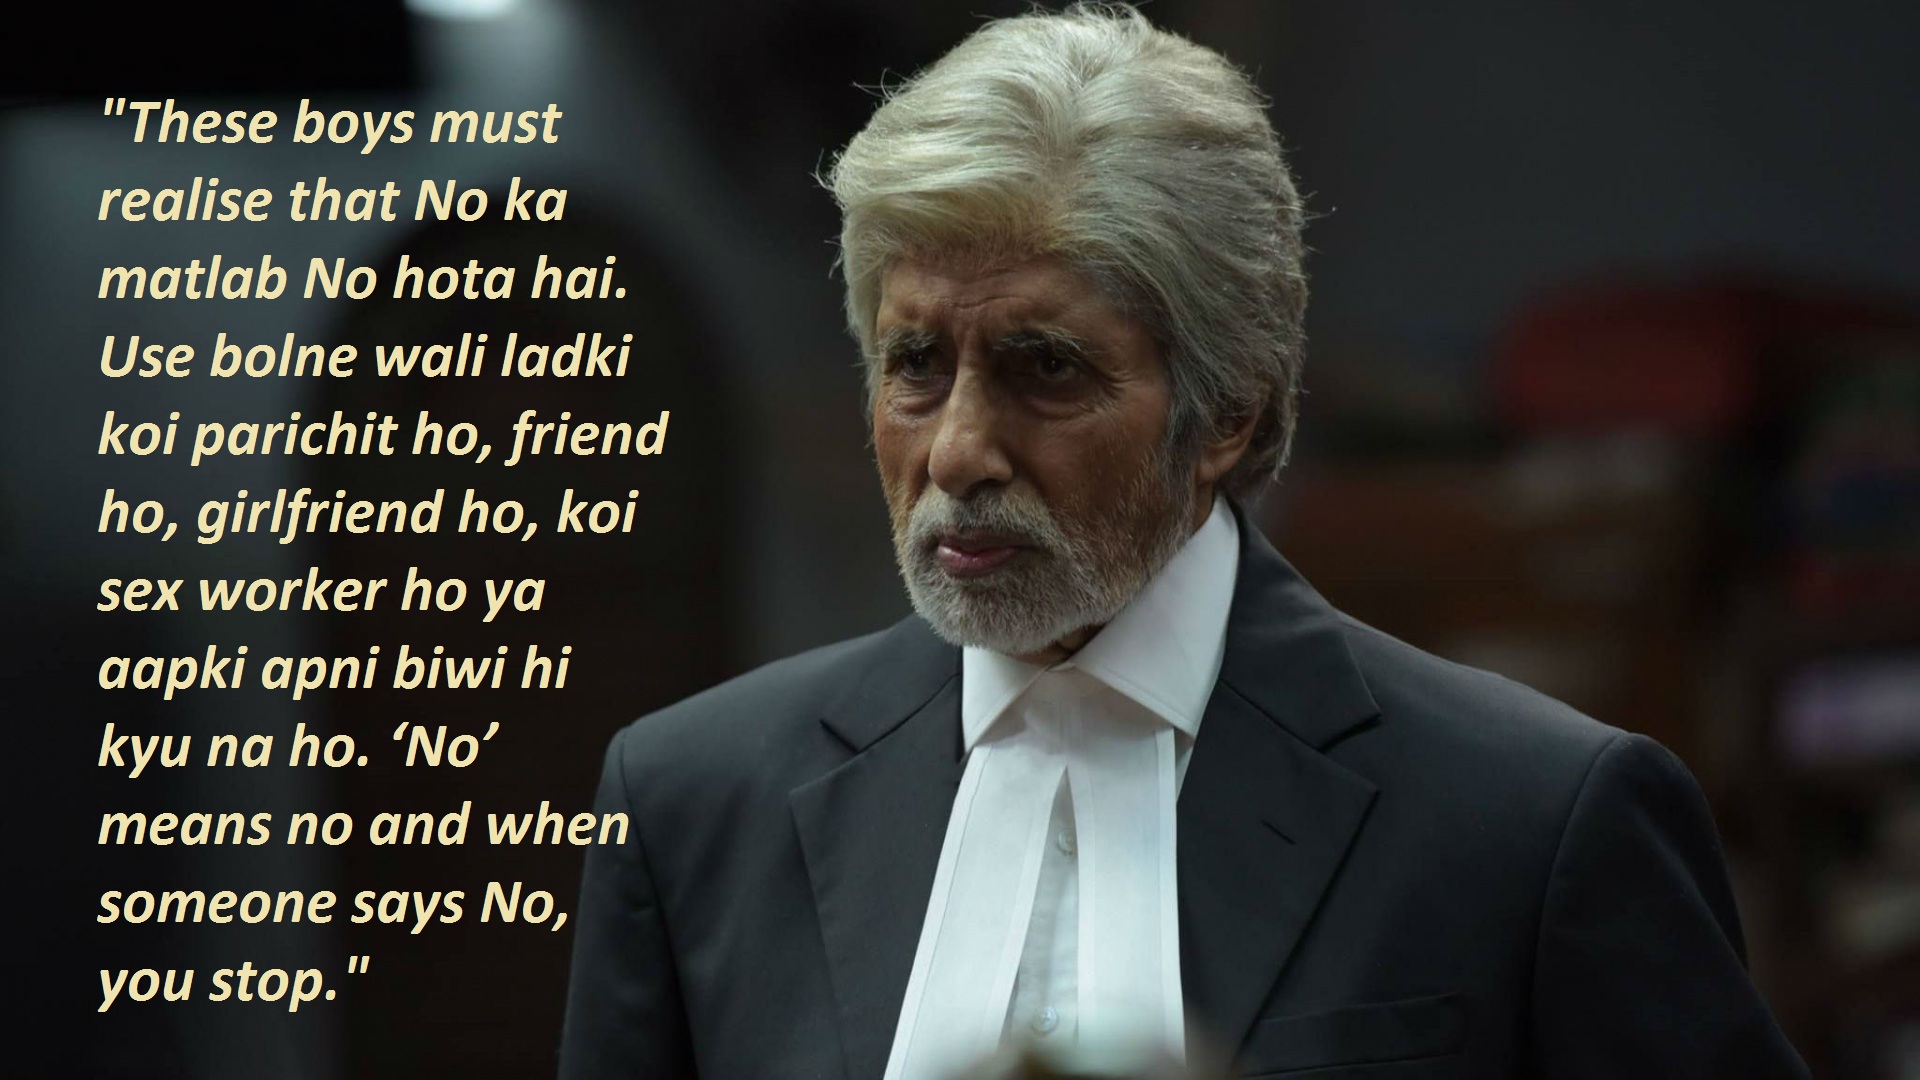 10. Best Dialogues From PINK Movie